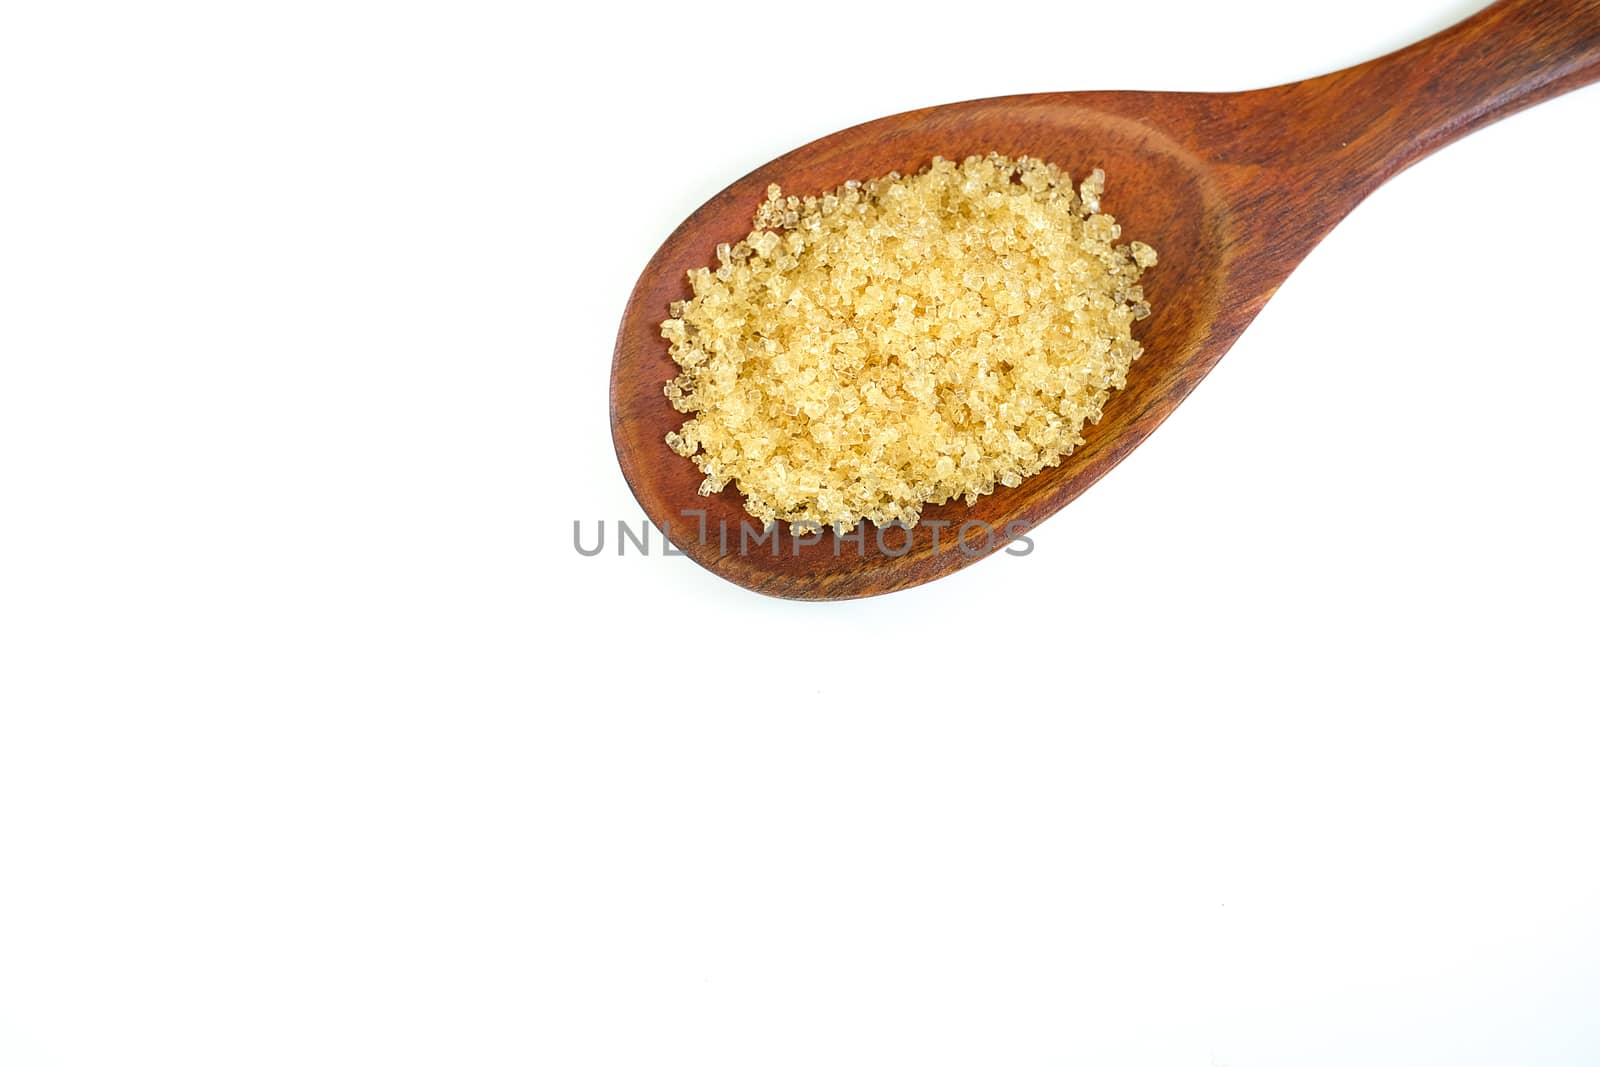 brown sugar and a wooden spoon, isolated on white background